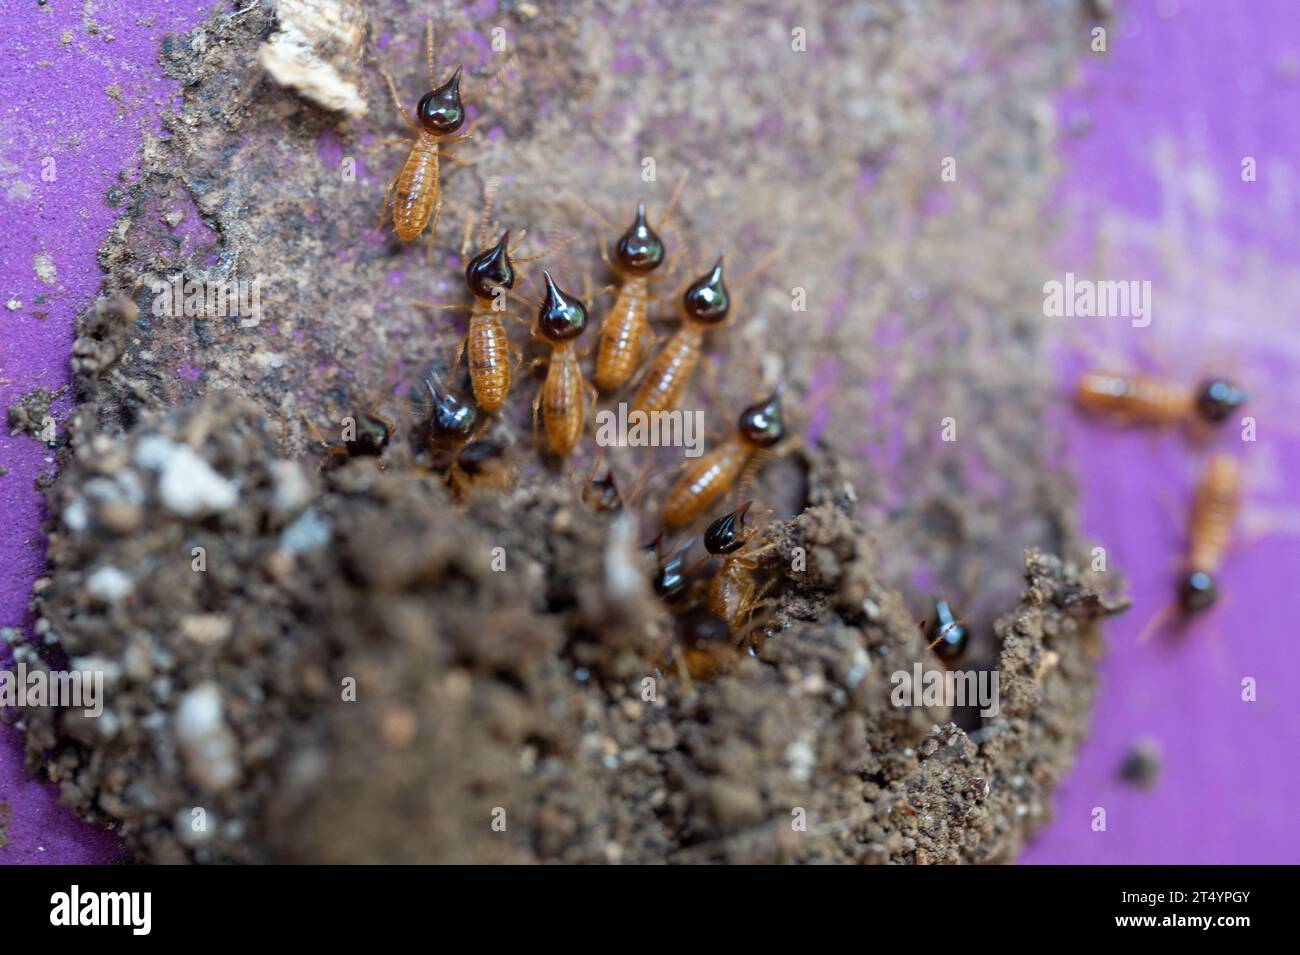 Many termites coming out  from tunnel macro close up view Stock Photo